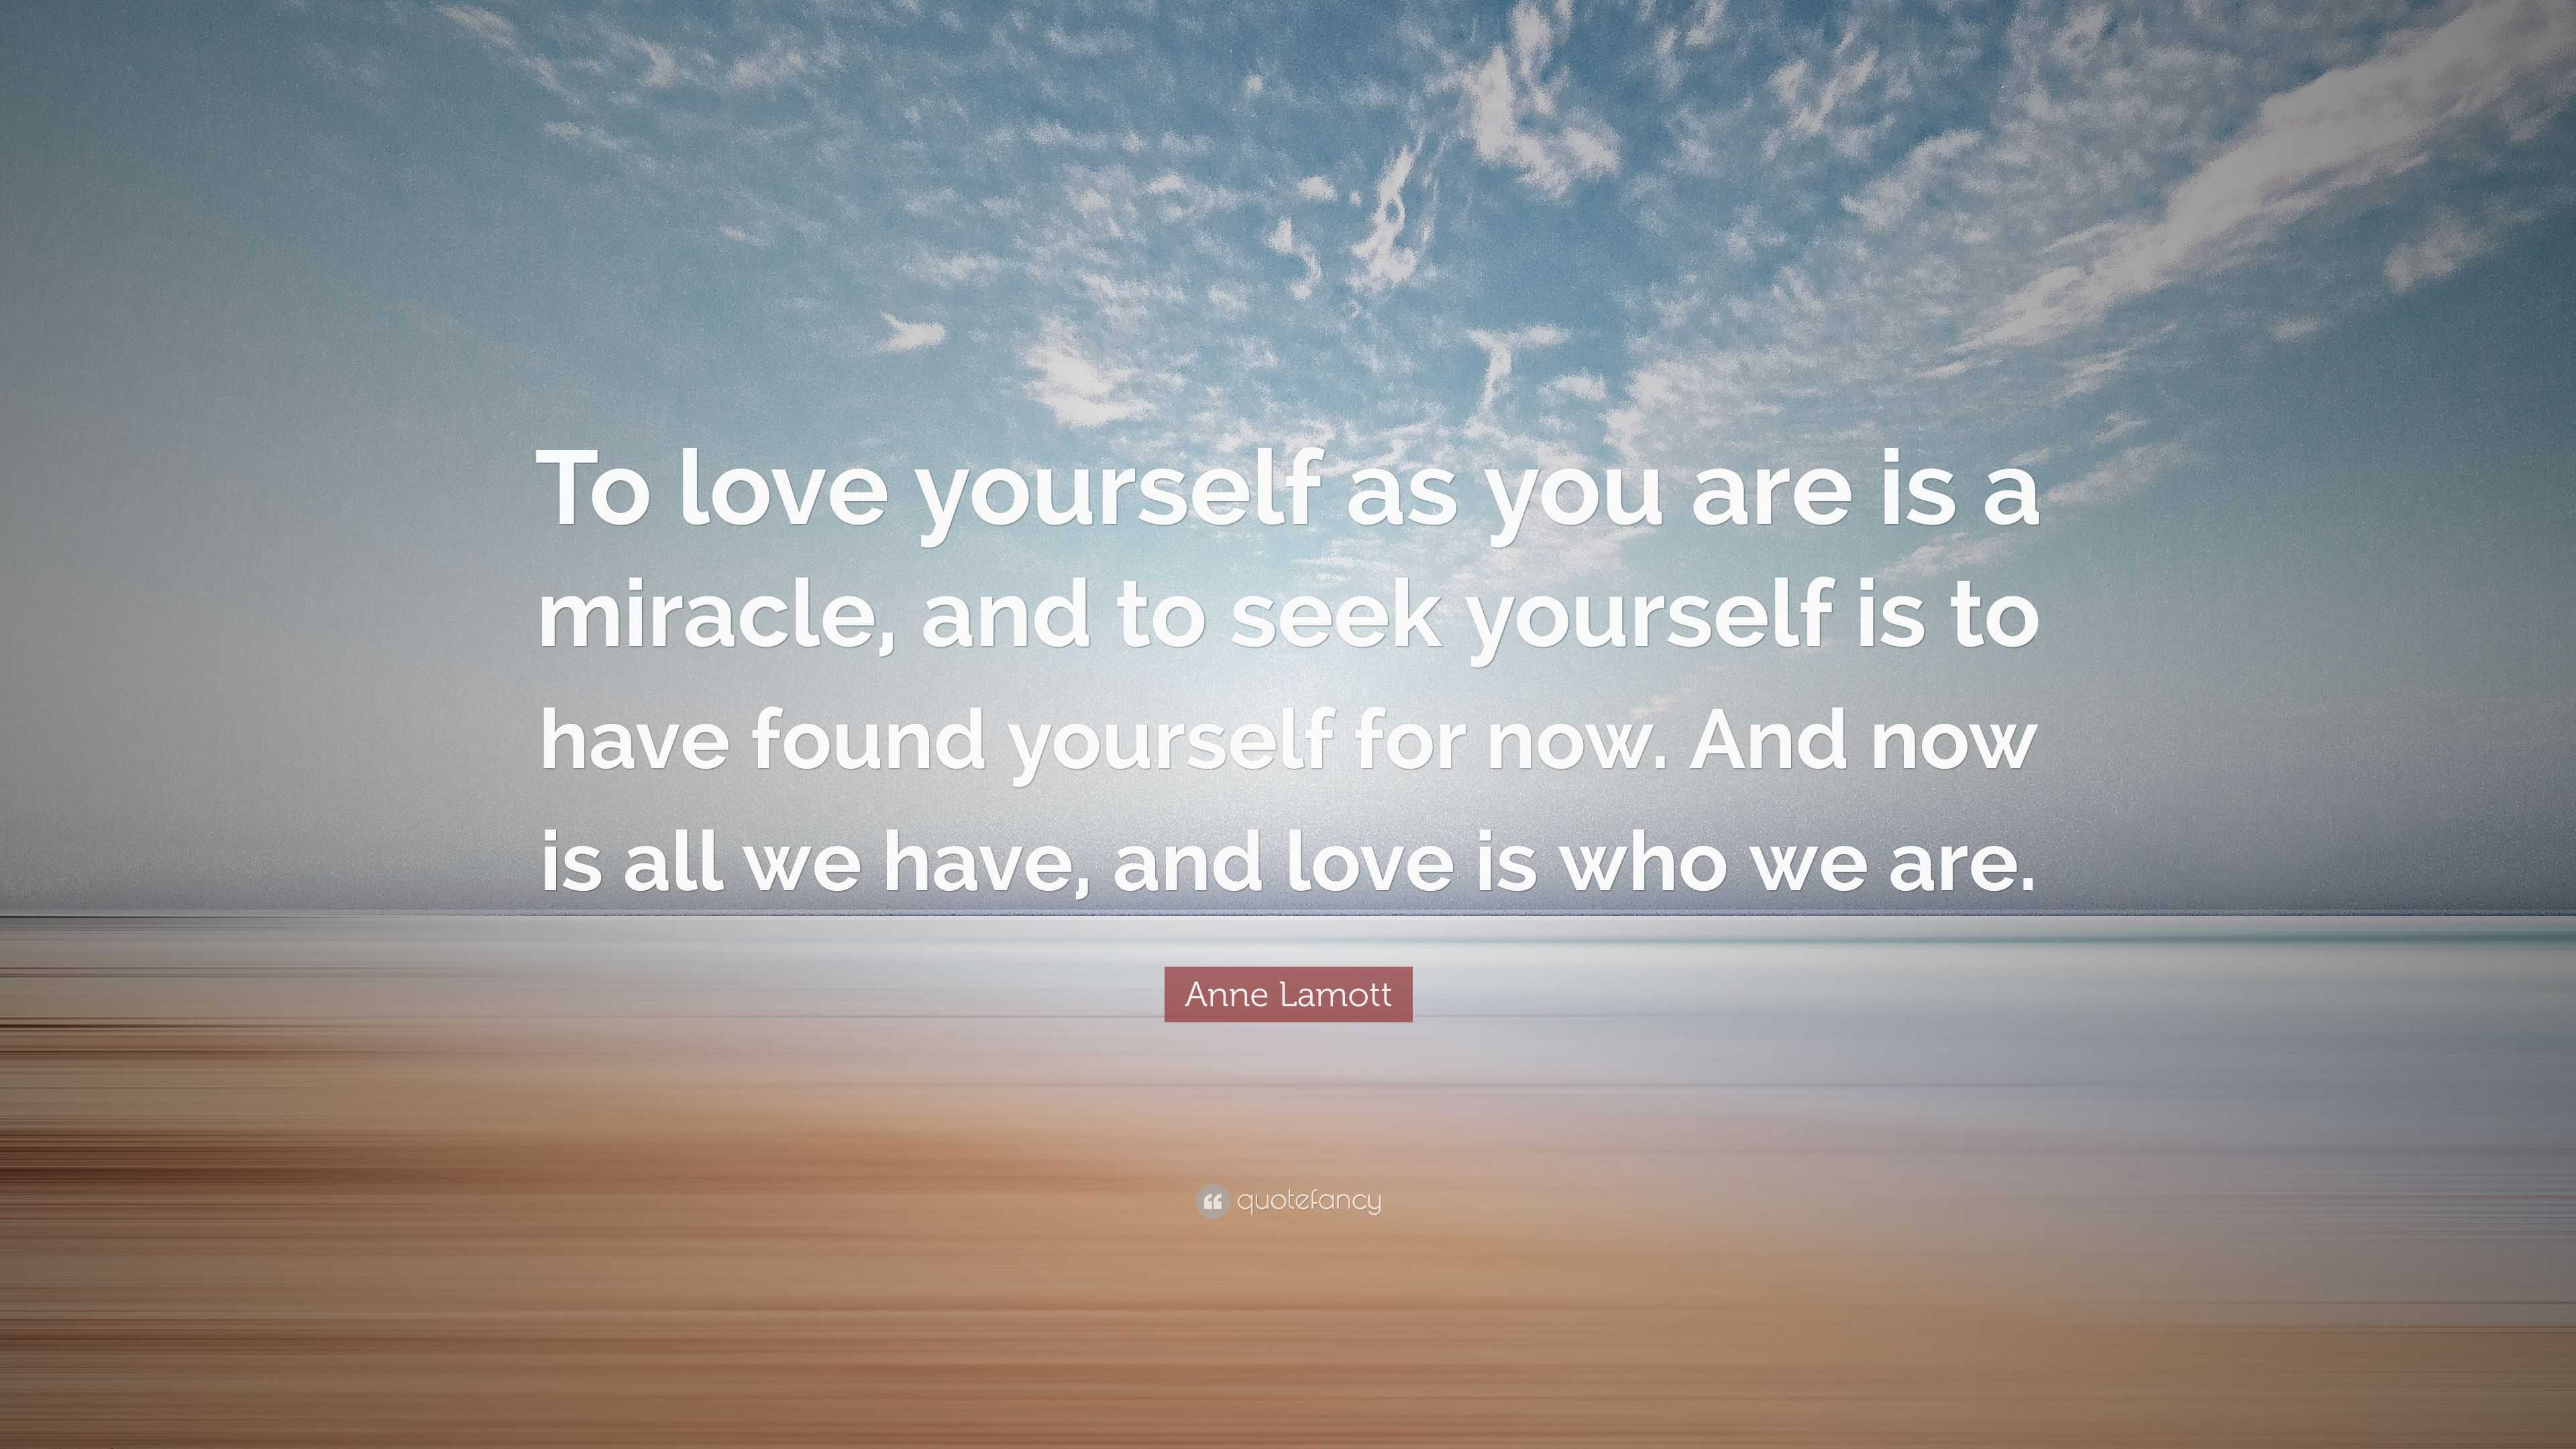 Anne Lamott Quote: “To love yourself as you are is a miracle, and to ...